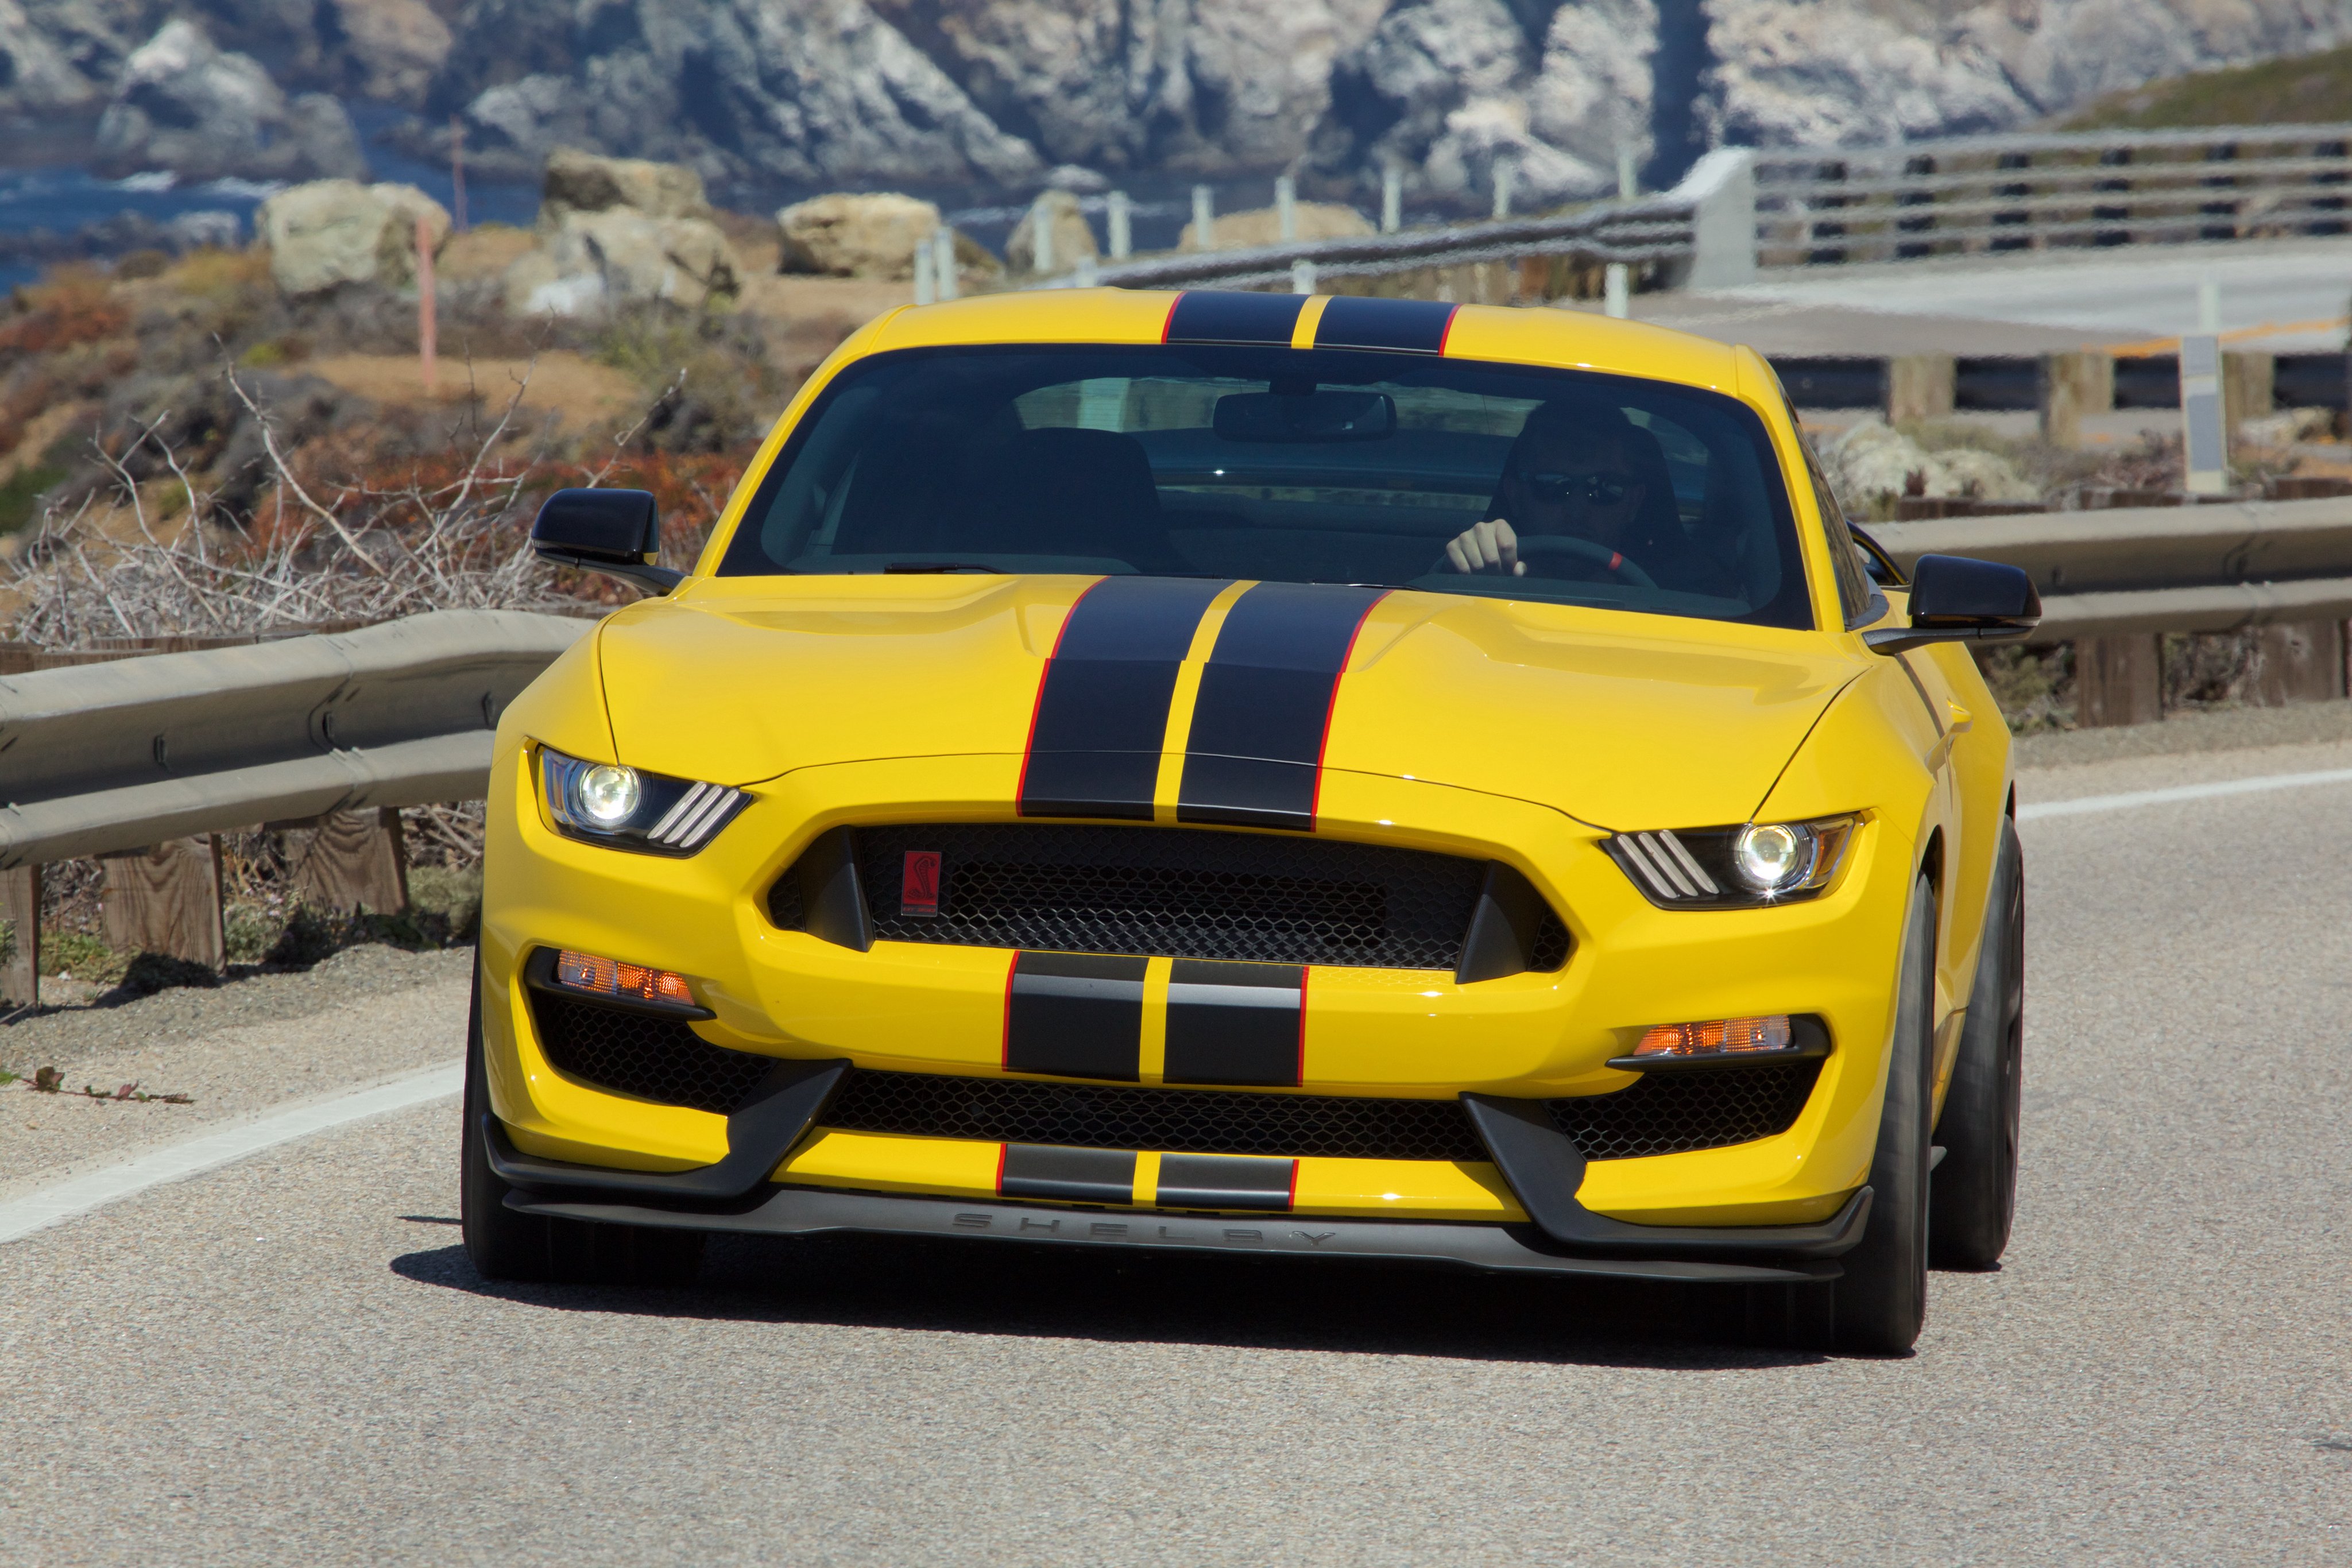 2016, Shelby, Gt350r, Ford, Mustang, Muscle, Gt350 Wallpaper